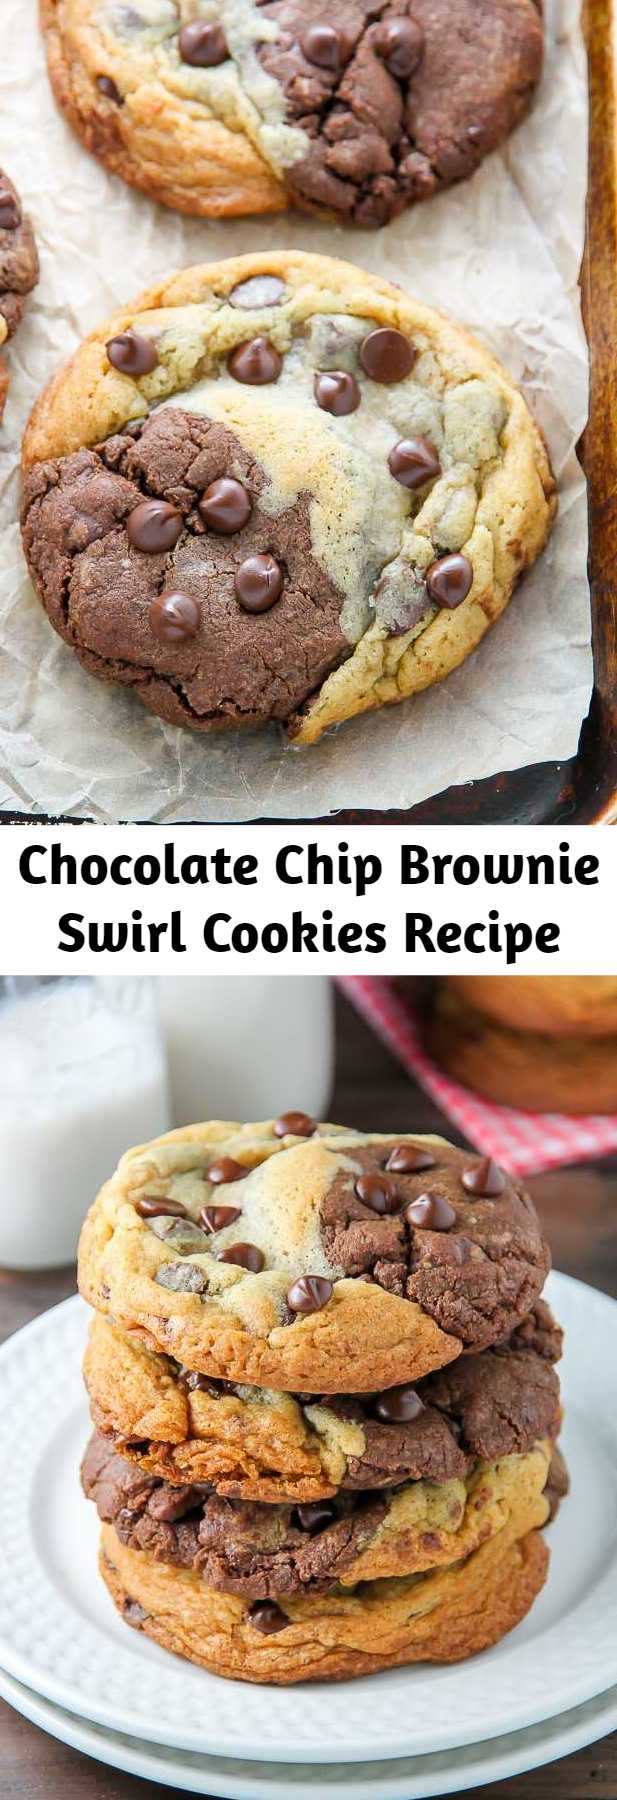 Chocolate Chip Brownie Swirl Cookies Recipe - What happens when a cookie and a brownie meet? Chocolate Chip Brownie Swirl Cookies. Also known as Brookies by some! These cookies are the best of both worlds.